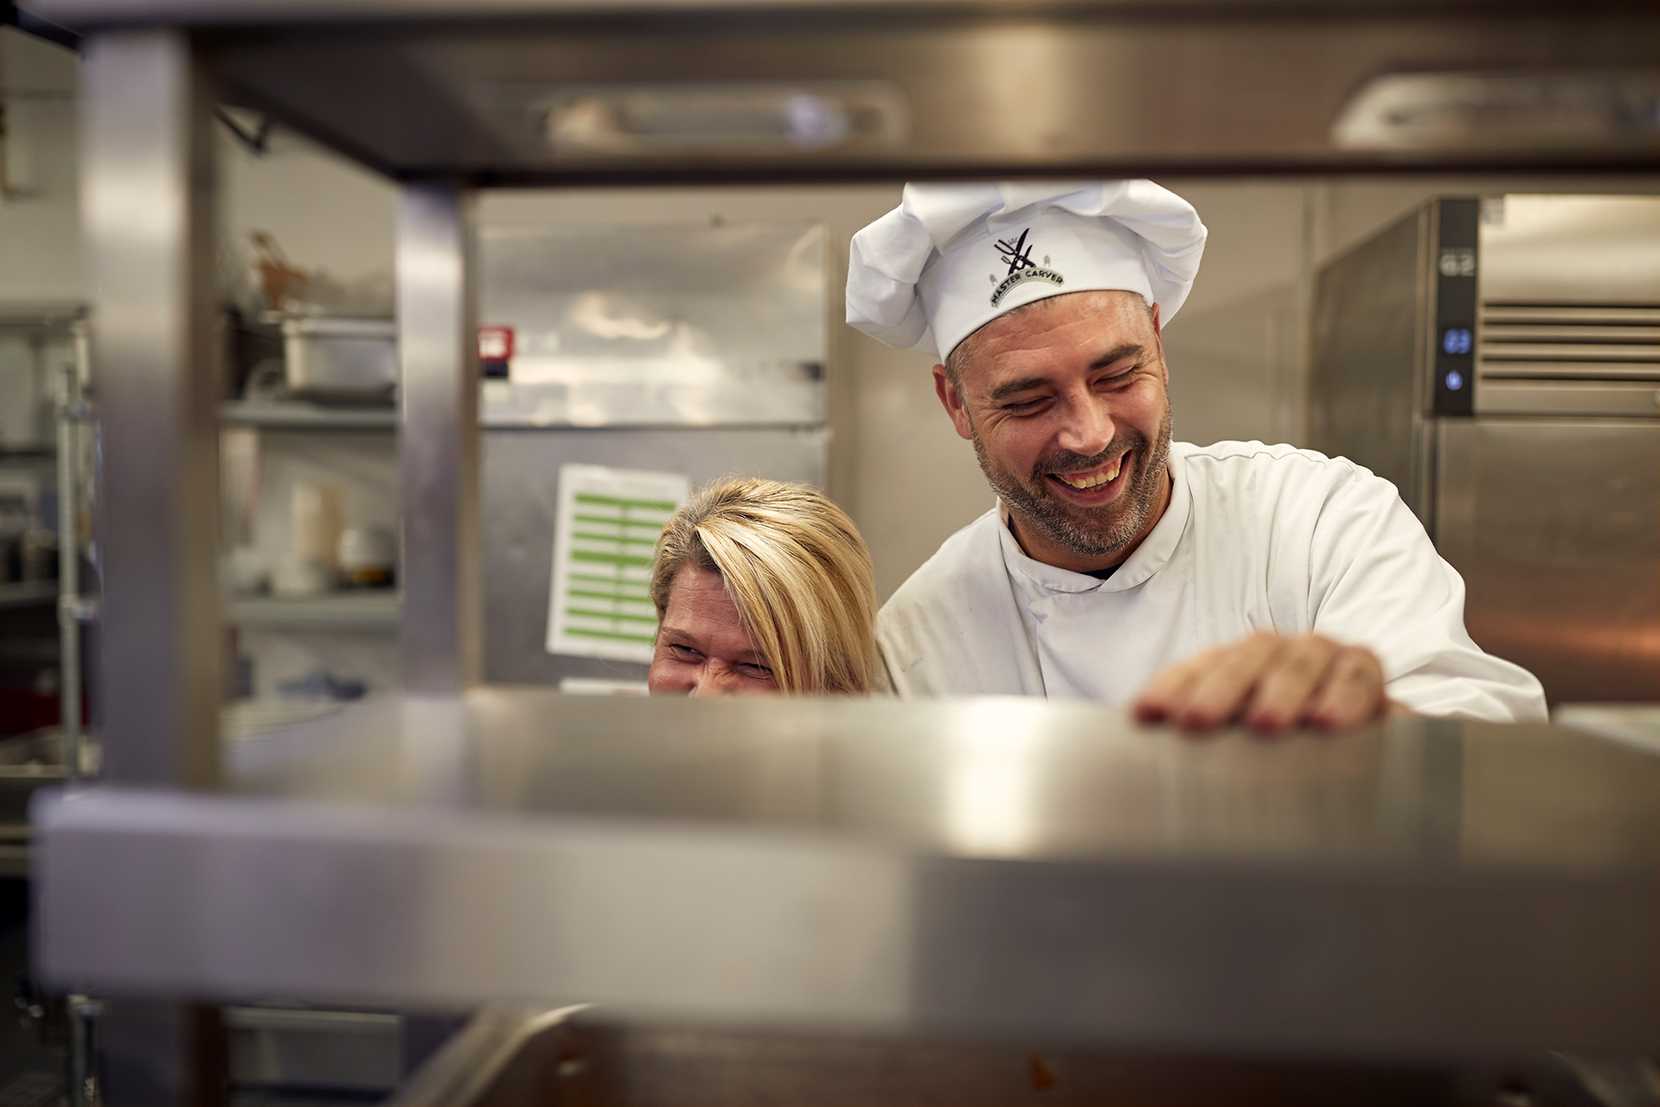 A chef and his co-worker are laughing in a kitchen.